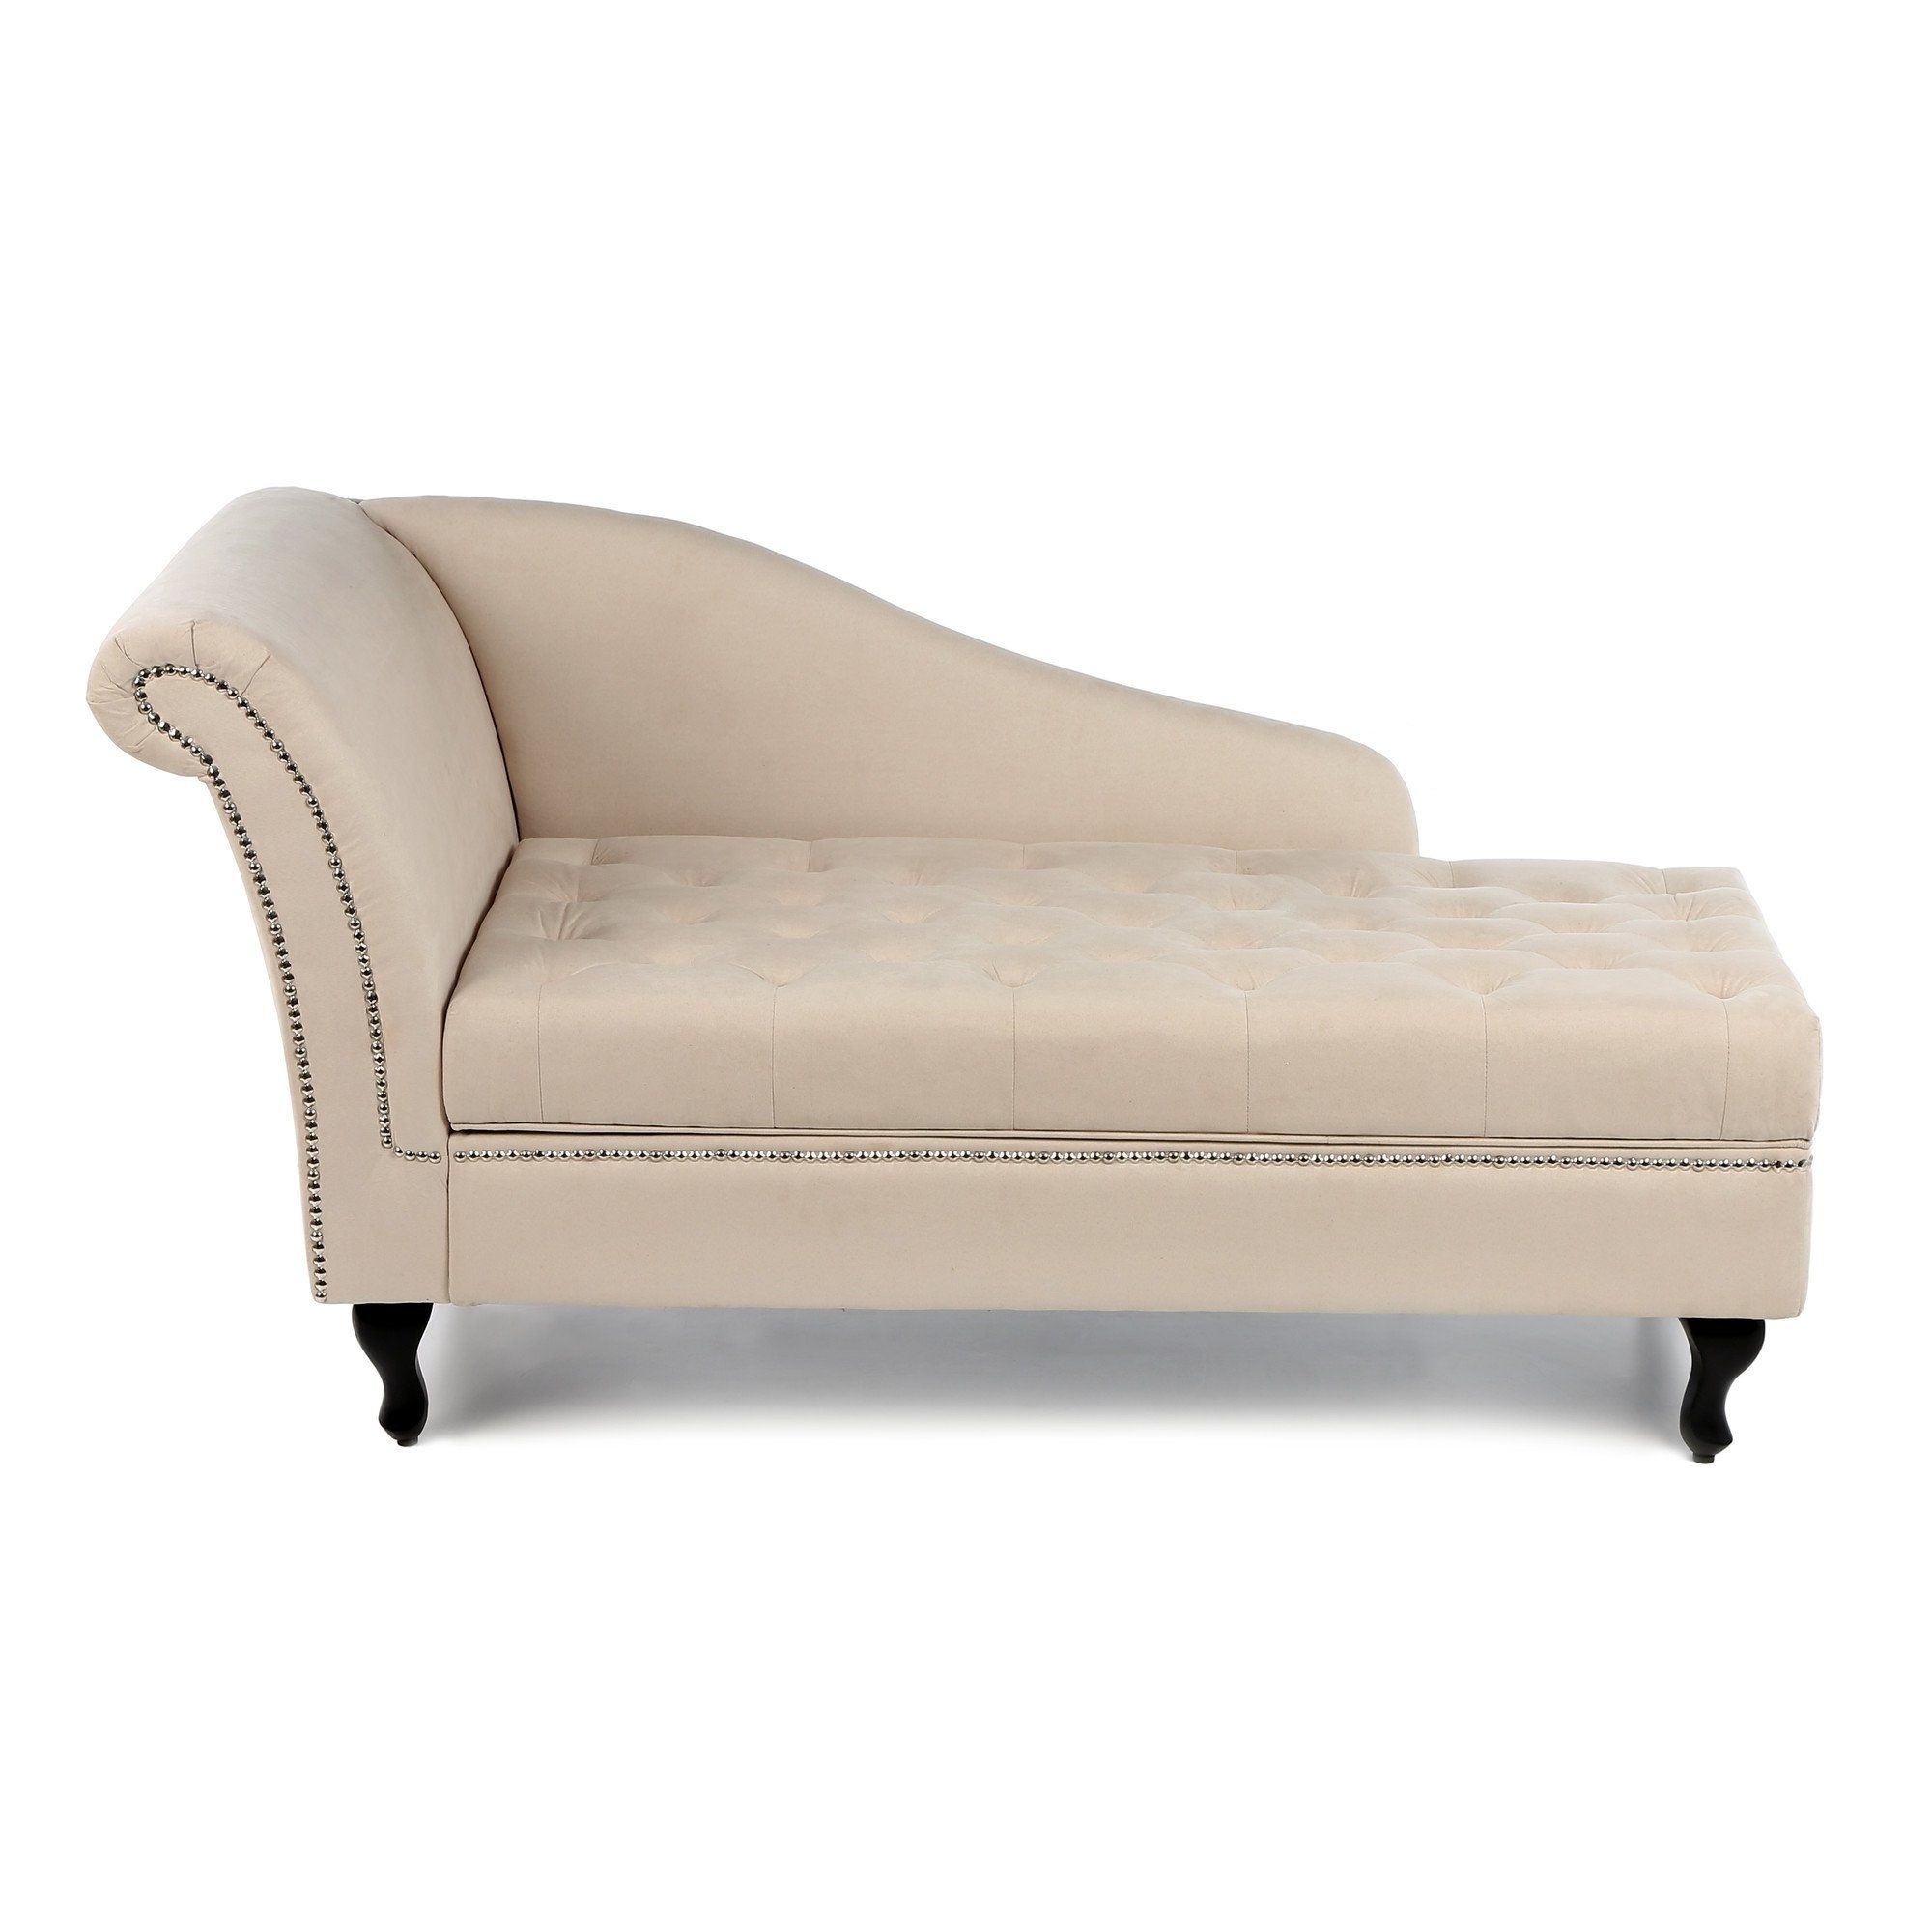 Chaise Lounge Chairs Under $300 For Popular $300 Amazon – Storage Chaise Lounge Luxurious Tufted Classic (View 3 of 15)